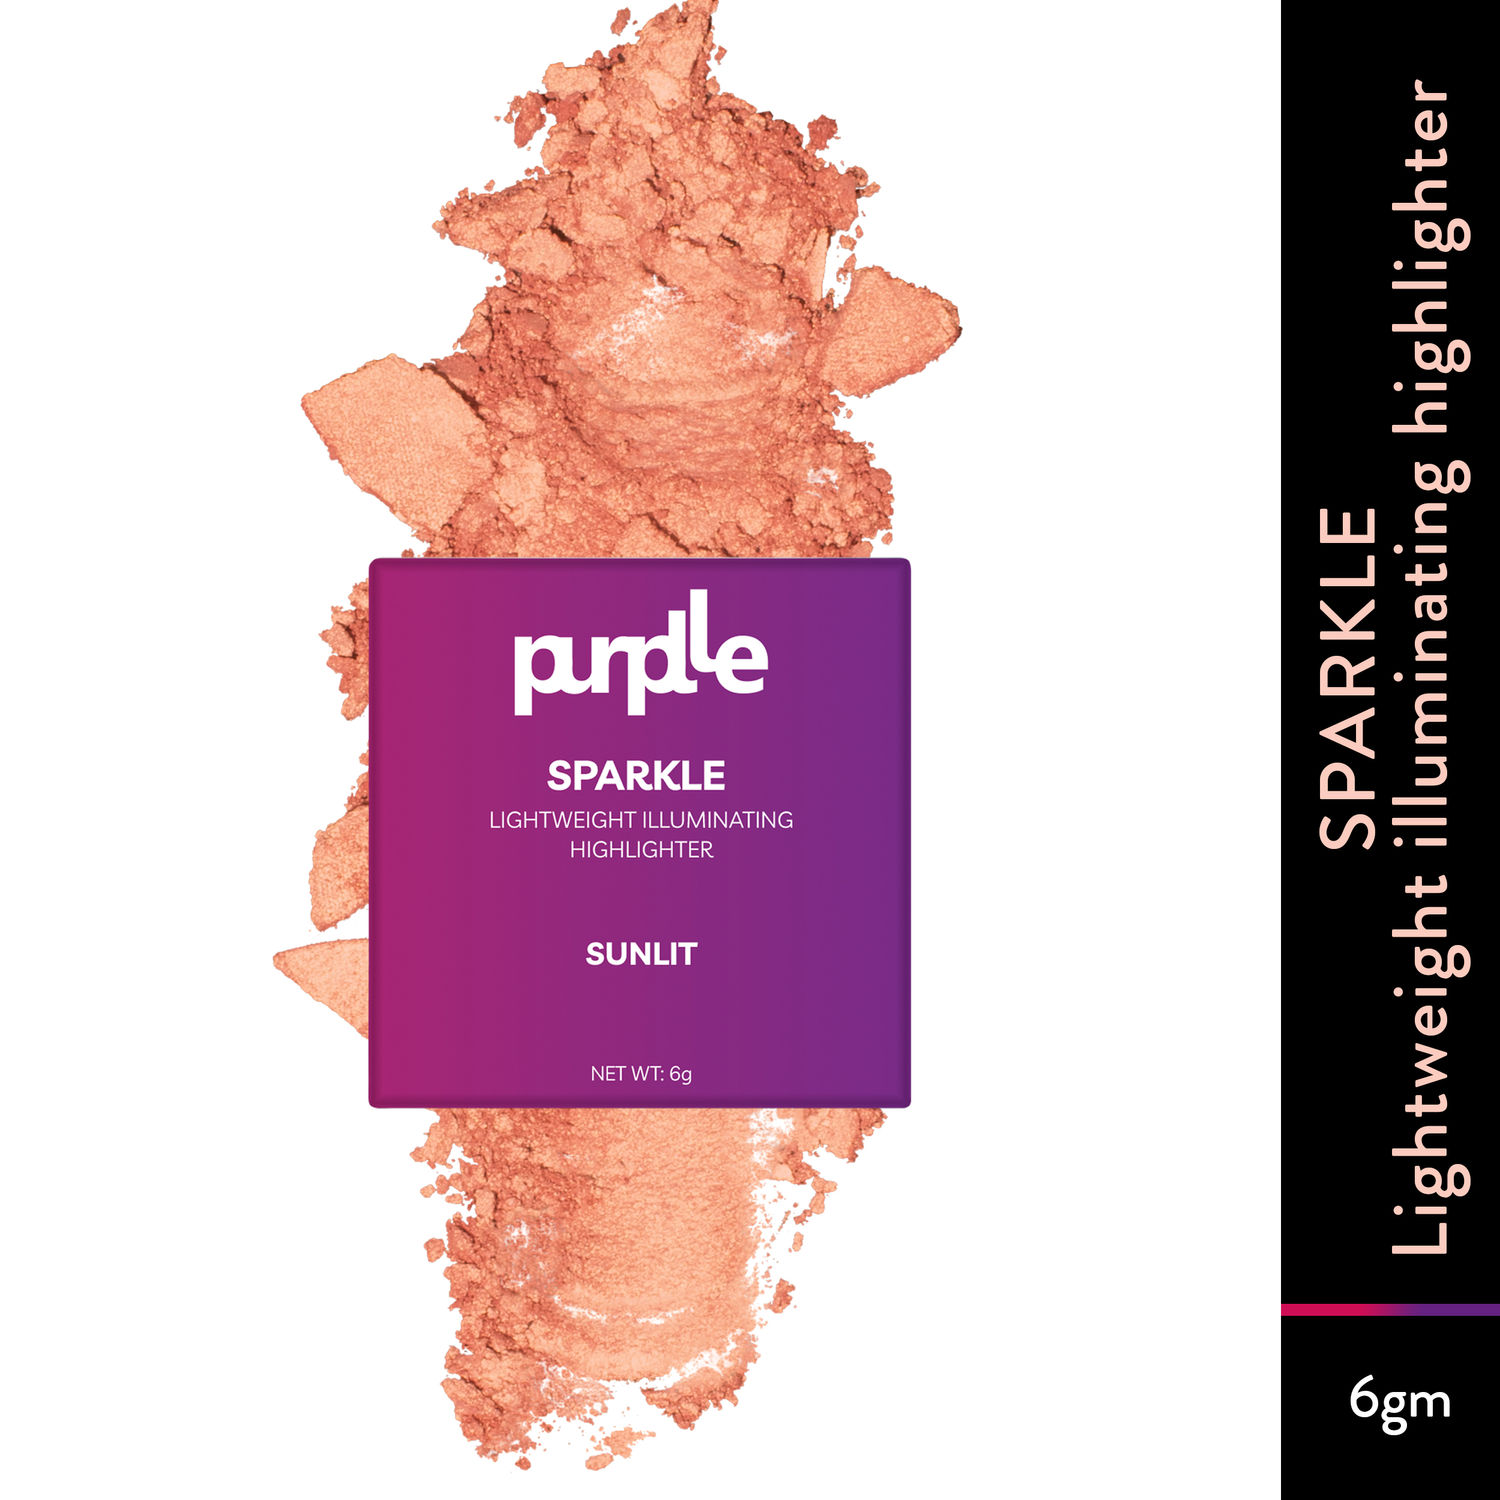 Purplle Sparkle Lightweight Illuminating Highlighter - Rose | Ultra Shimmery| High Pigmentation | Lifts Face | Blendable | Long Lasting (6gm)